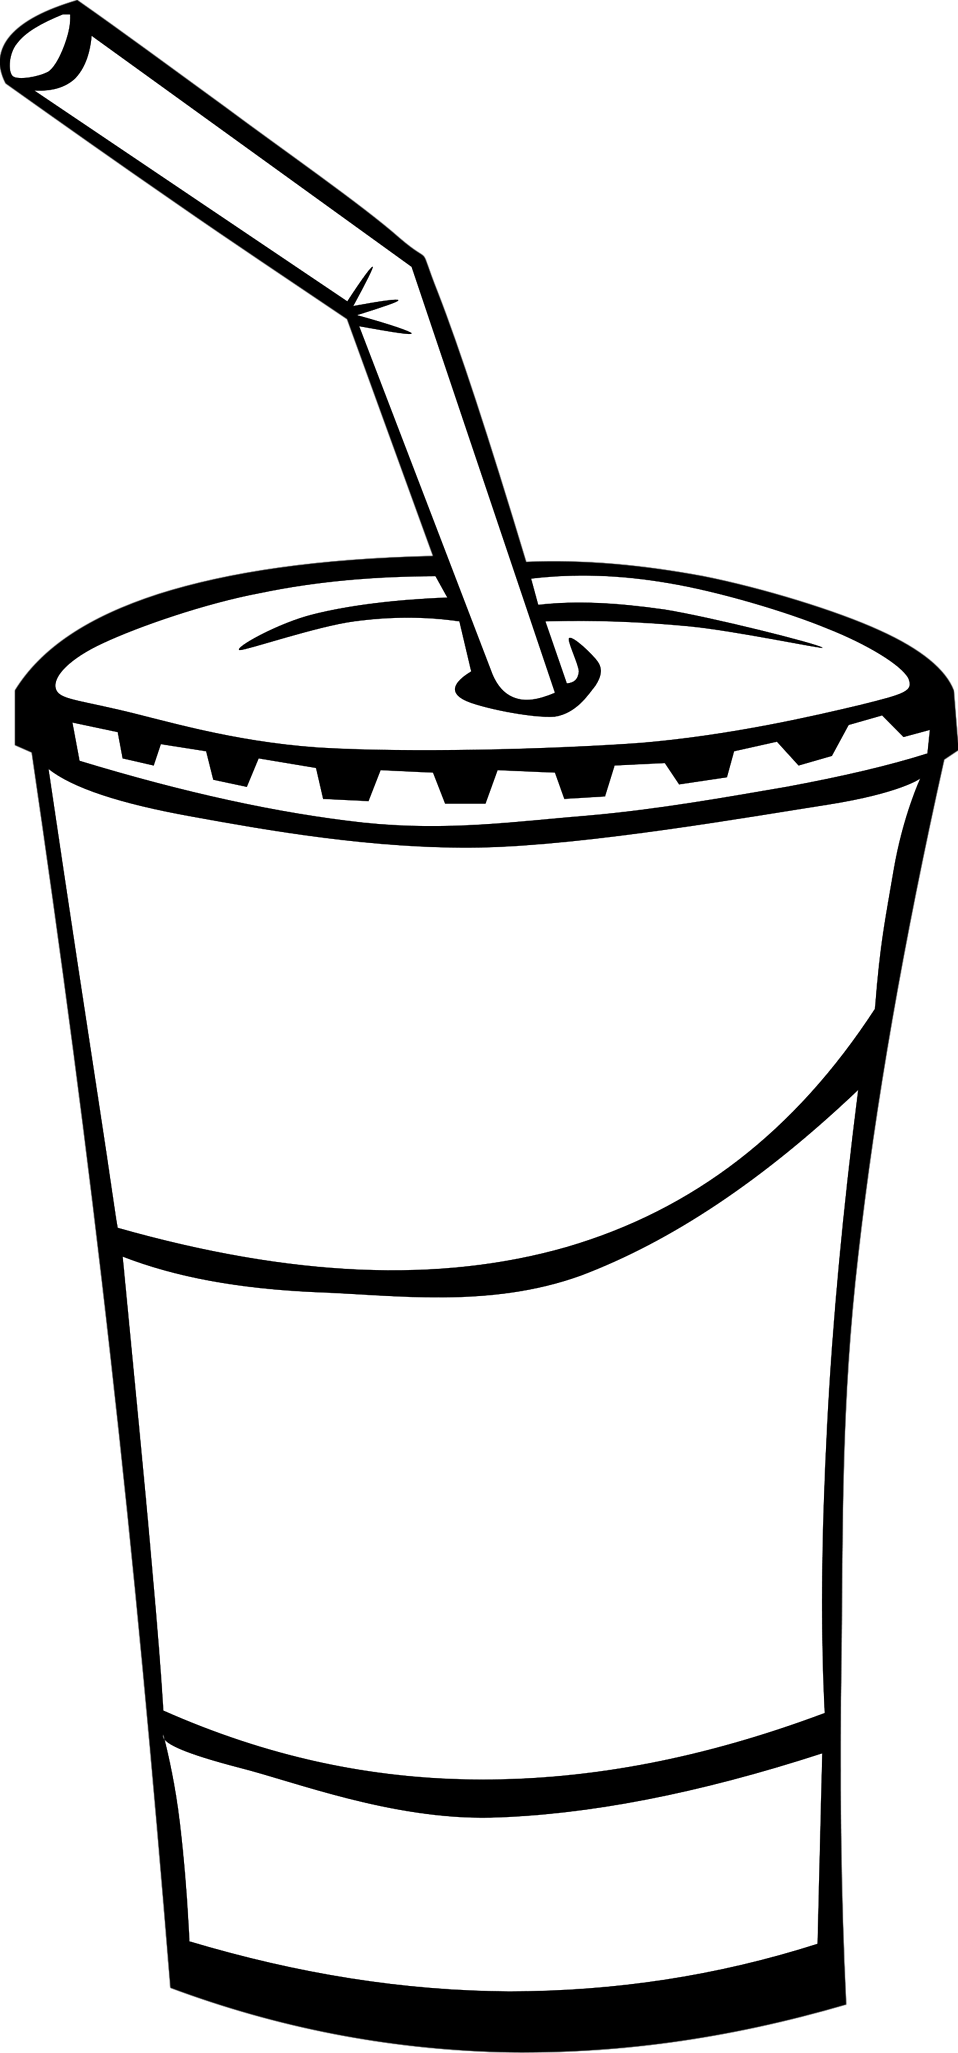 Cup straw